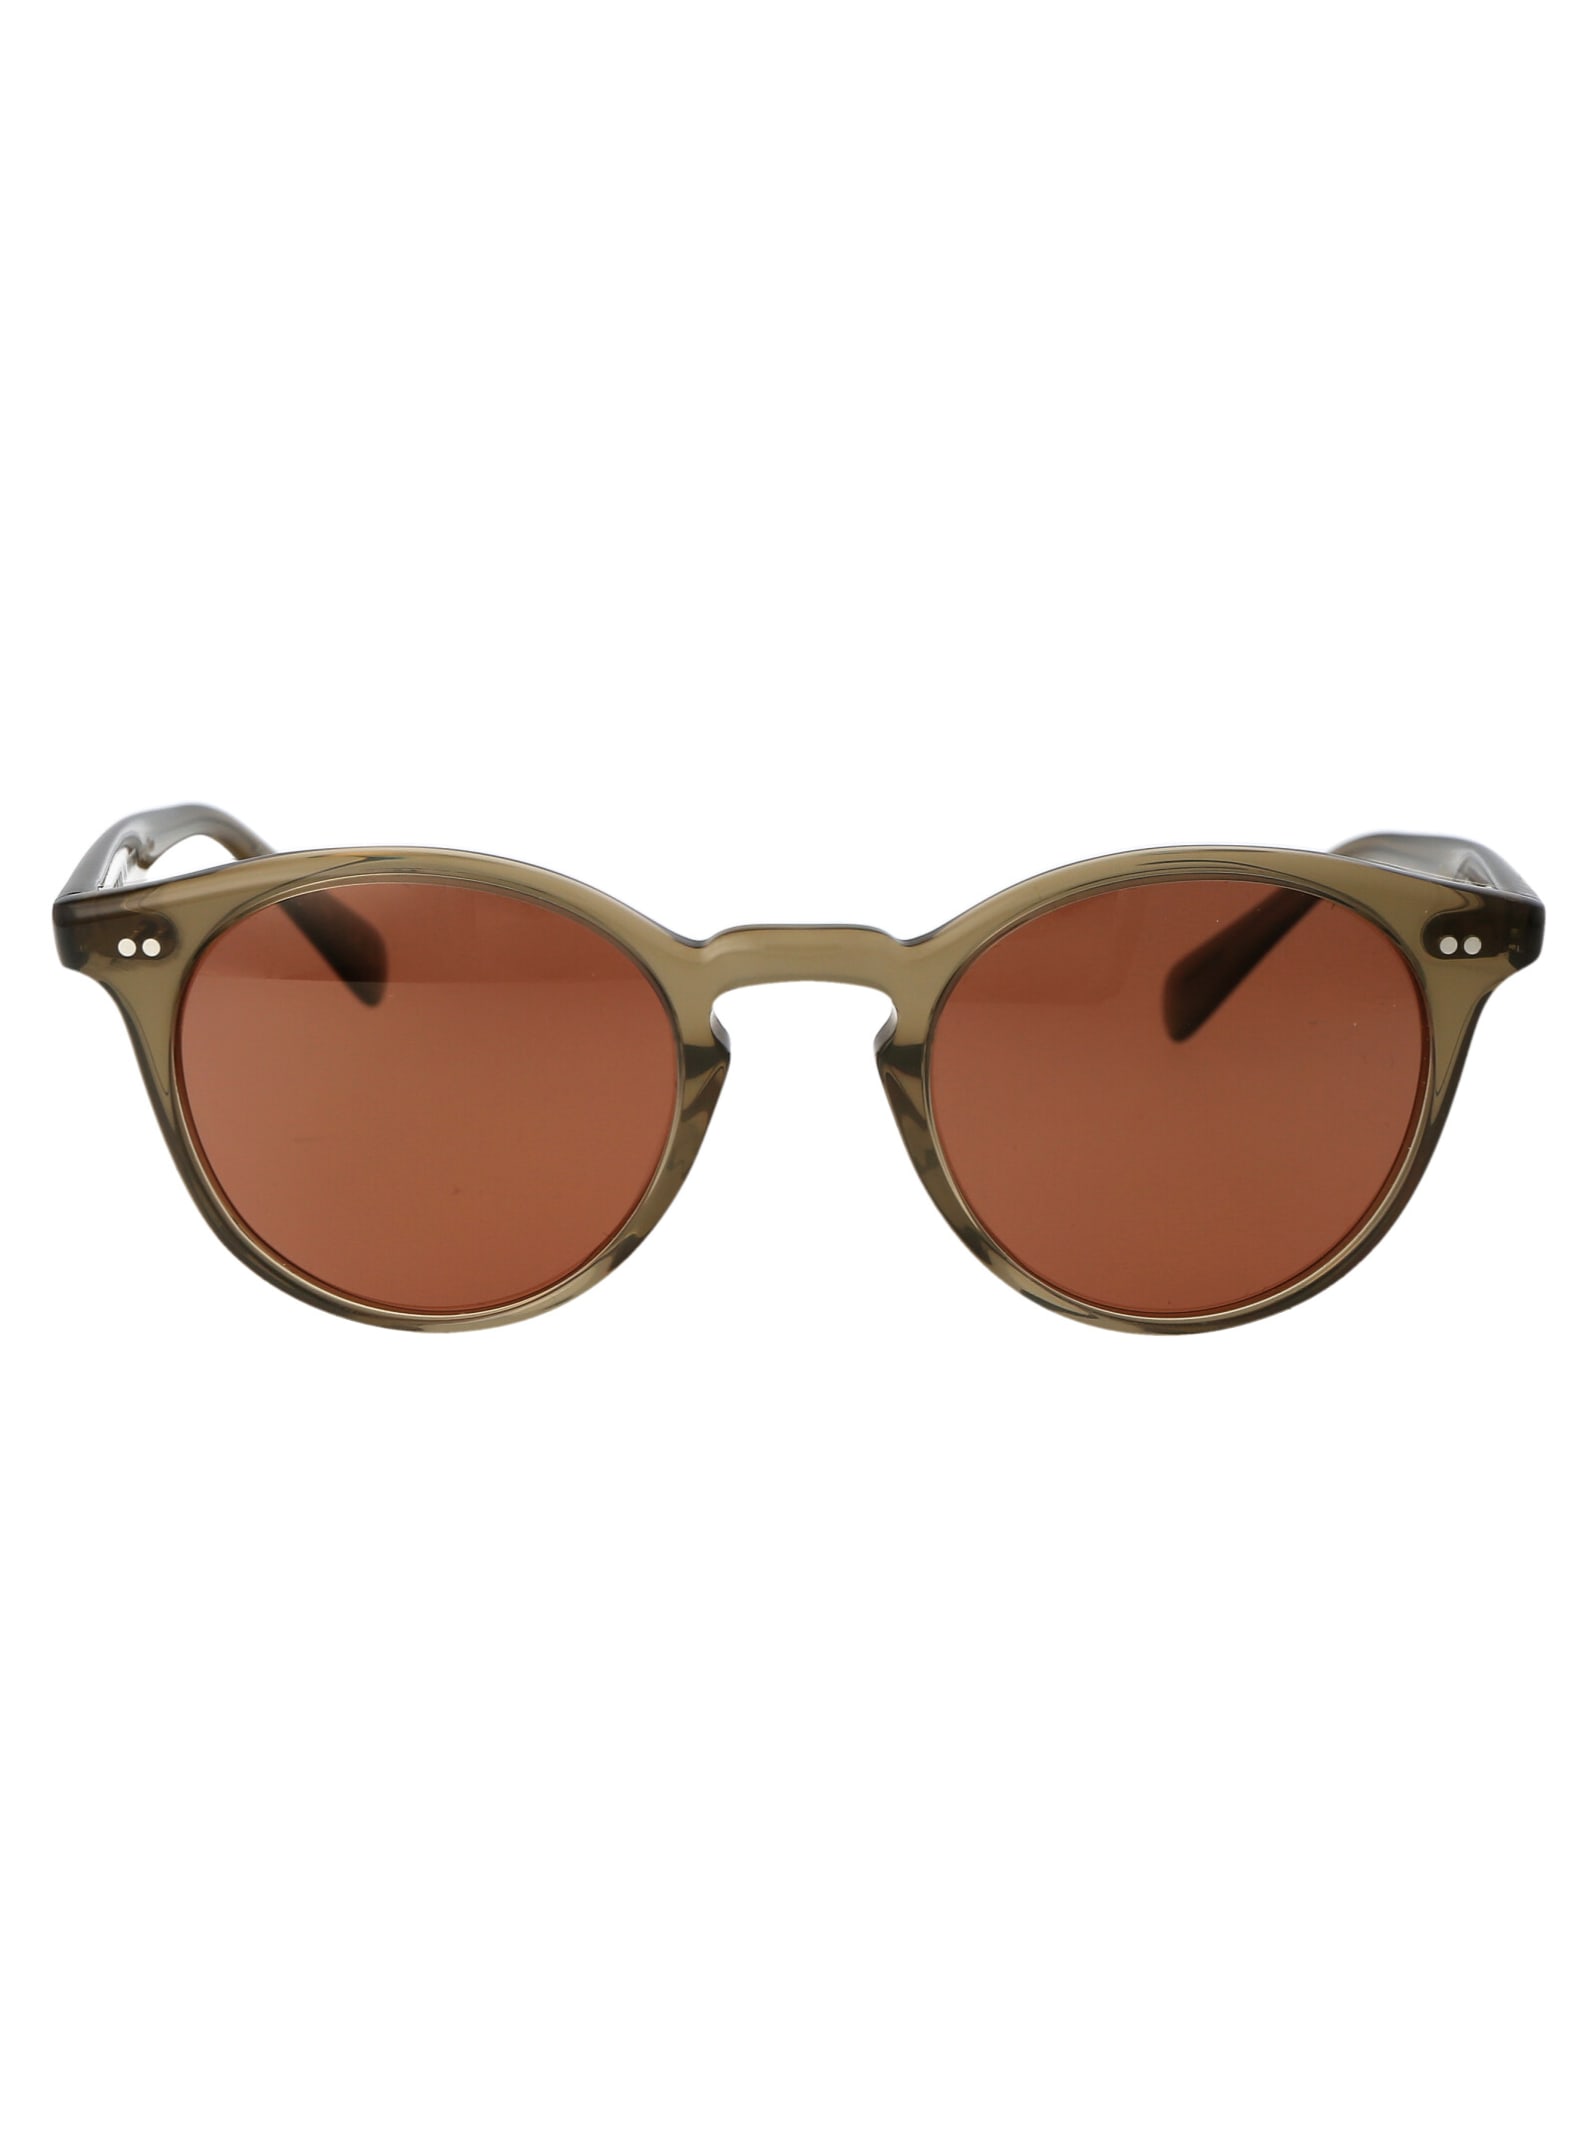 Oliver Peoples Romare Sun Sunglasses In 1678w4 Dusty Olive